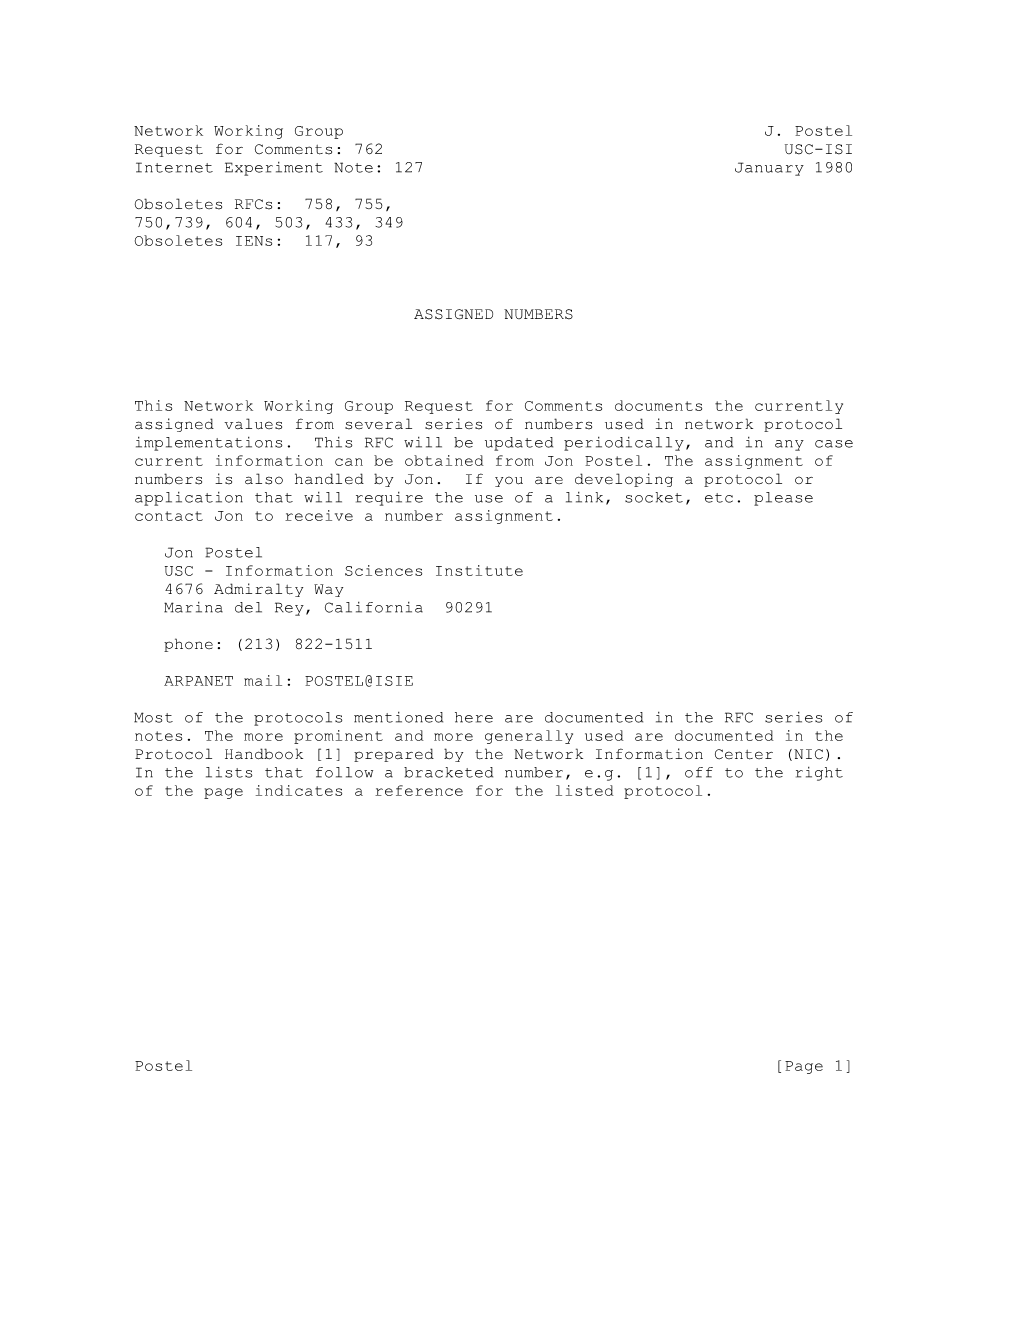 762 USC-ISI Internet Experiment Note: 127 January 1980